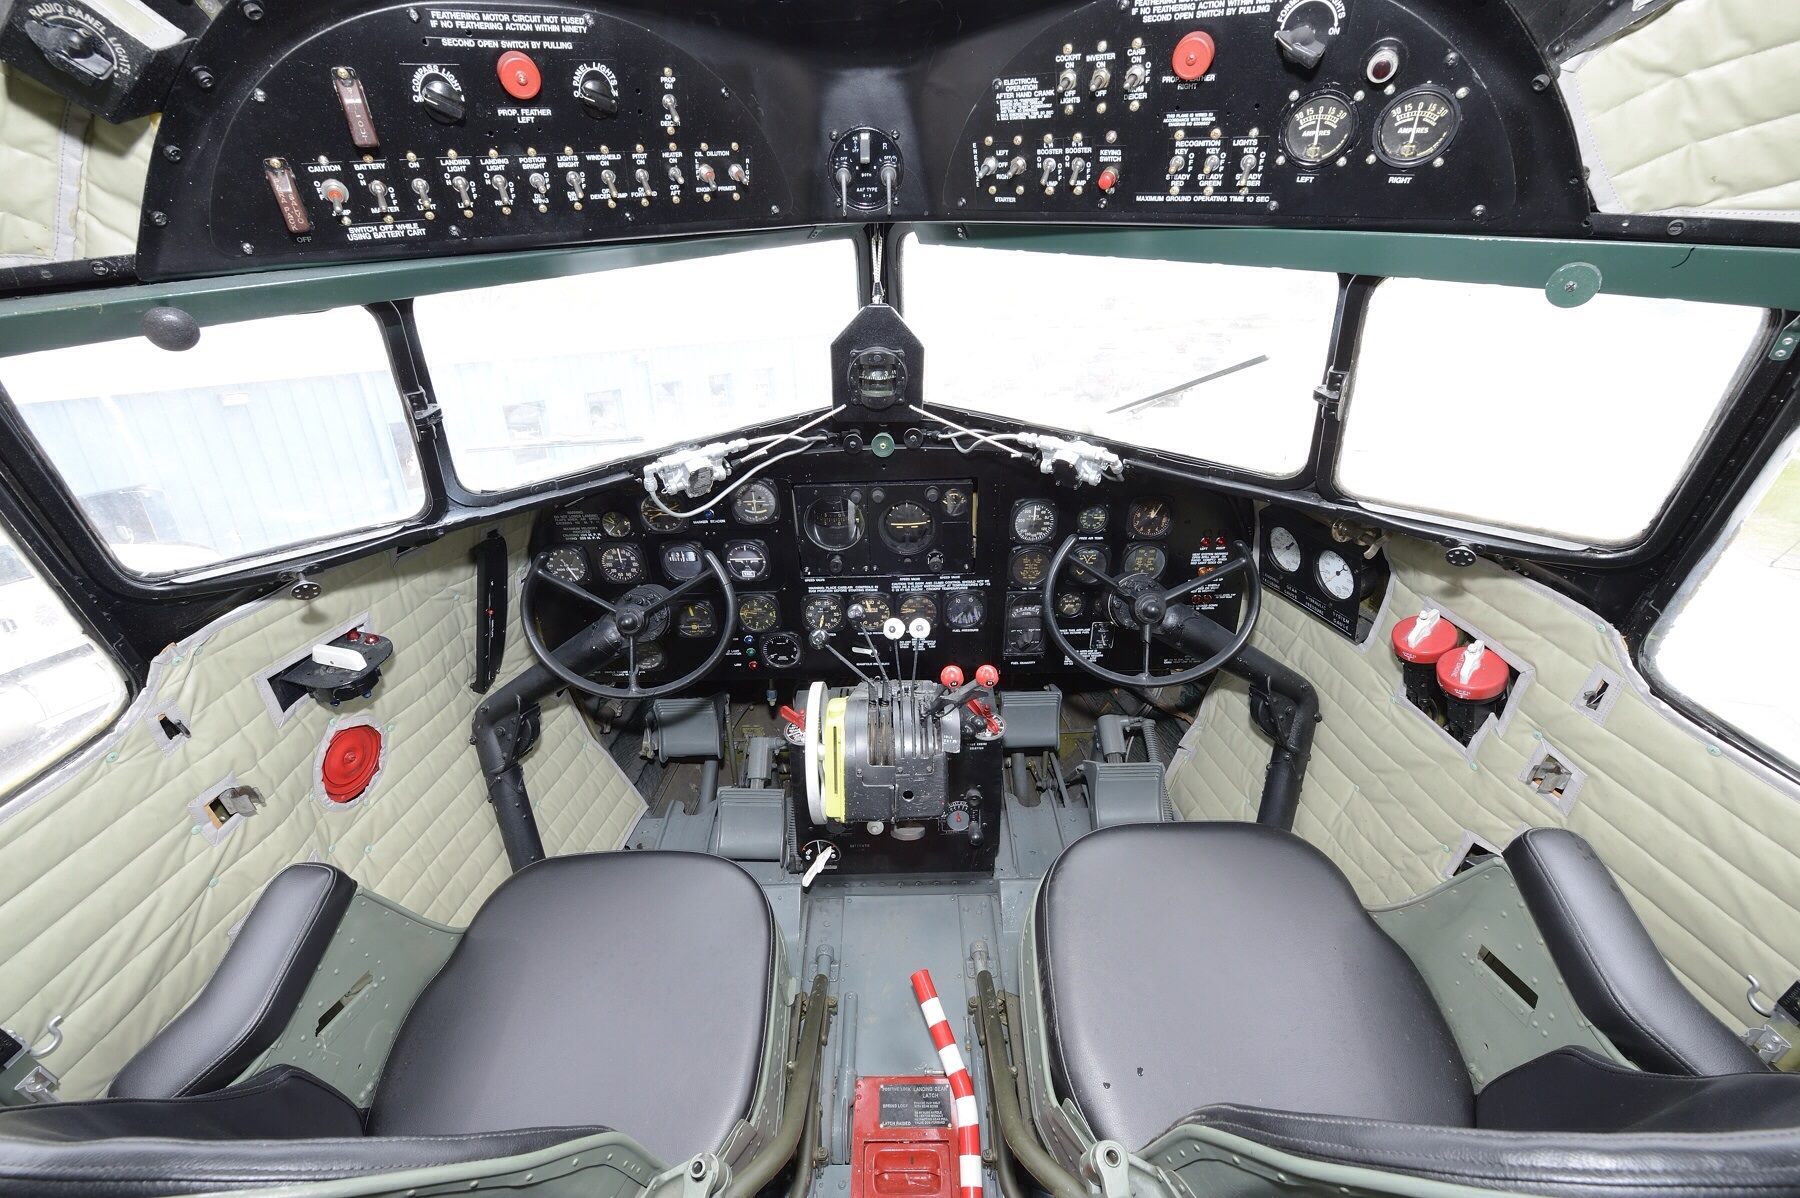 The immaculately restored Dakota's cockpit. One can easily see how it took 8 years to get the aircraft looking like this! (GMAM photo)